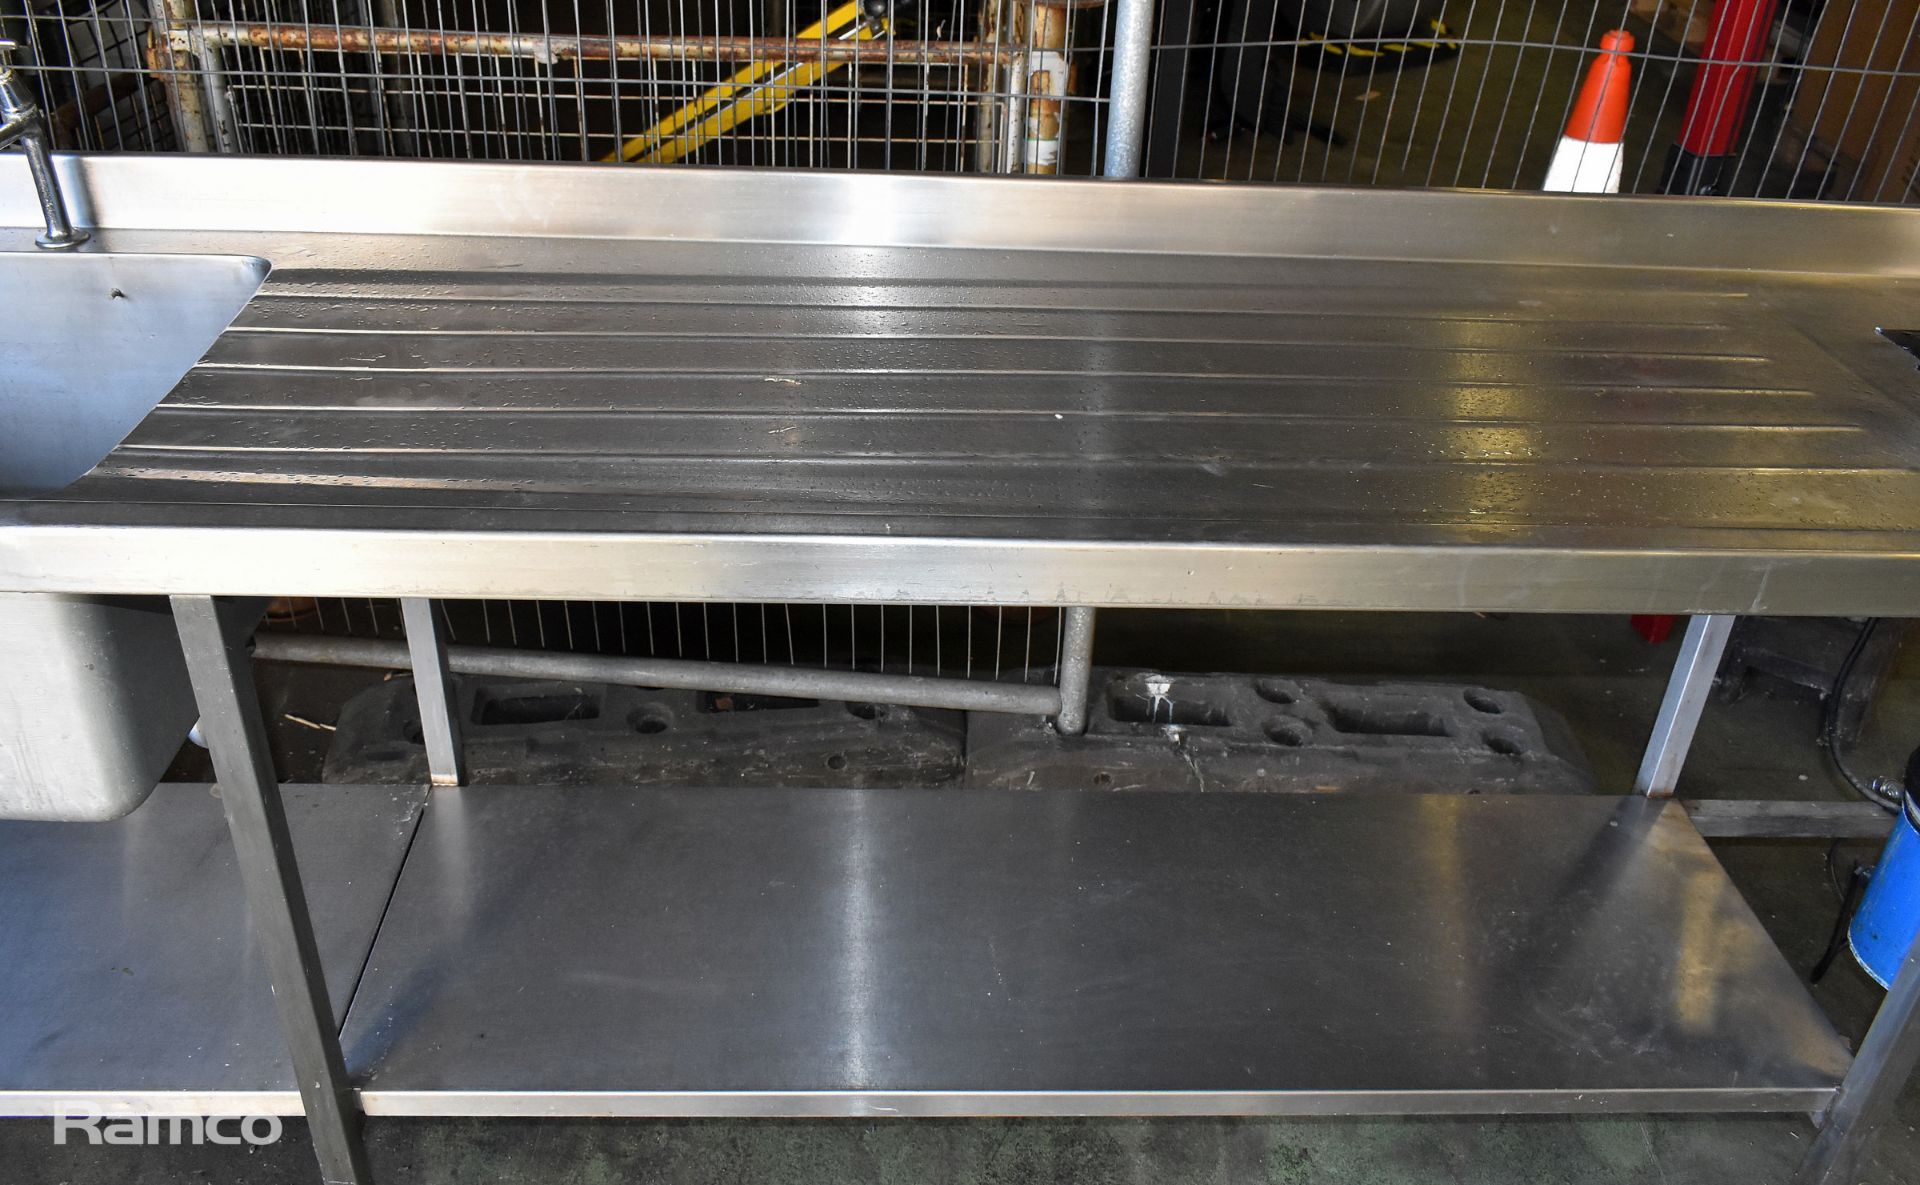 Stainless steel double sink unit with waste disposal - 310x80x100cm - Image 4 of 8